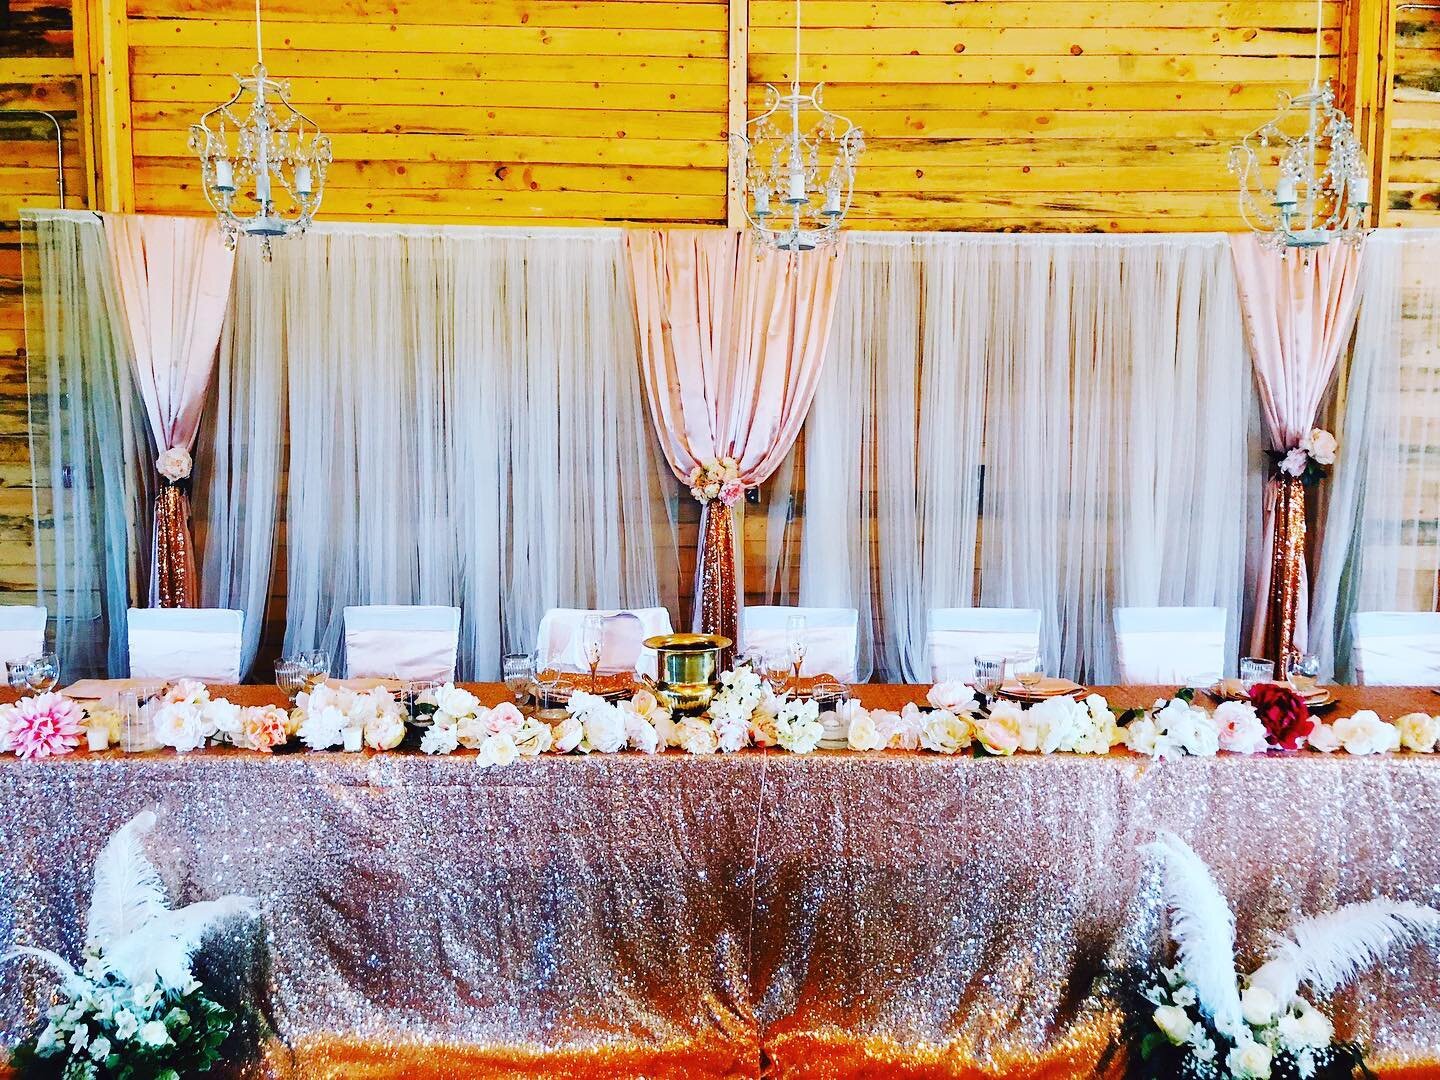 Typically placed at the prime spot at your reception venue, the head table is a major focal point of your celebration. With a curated list of unique individuals near and dear to you, the head table includes some of the most important members of your 